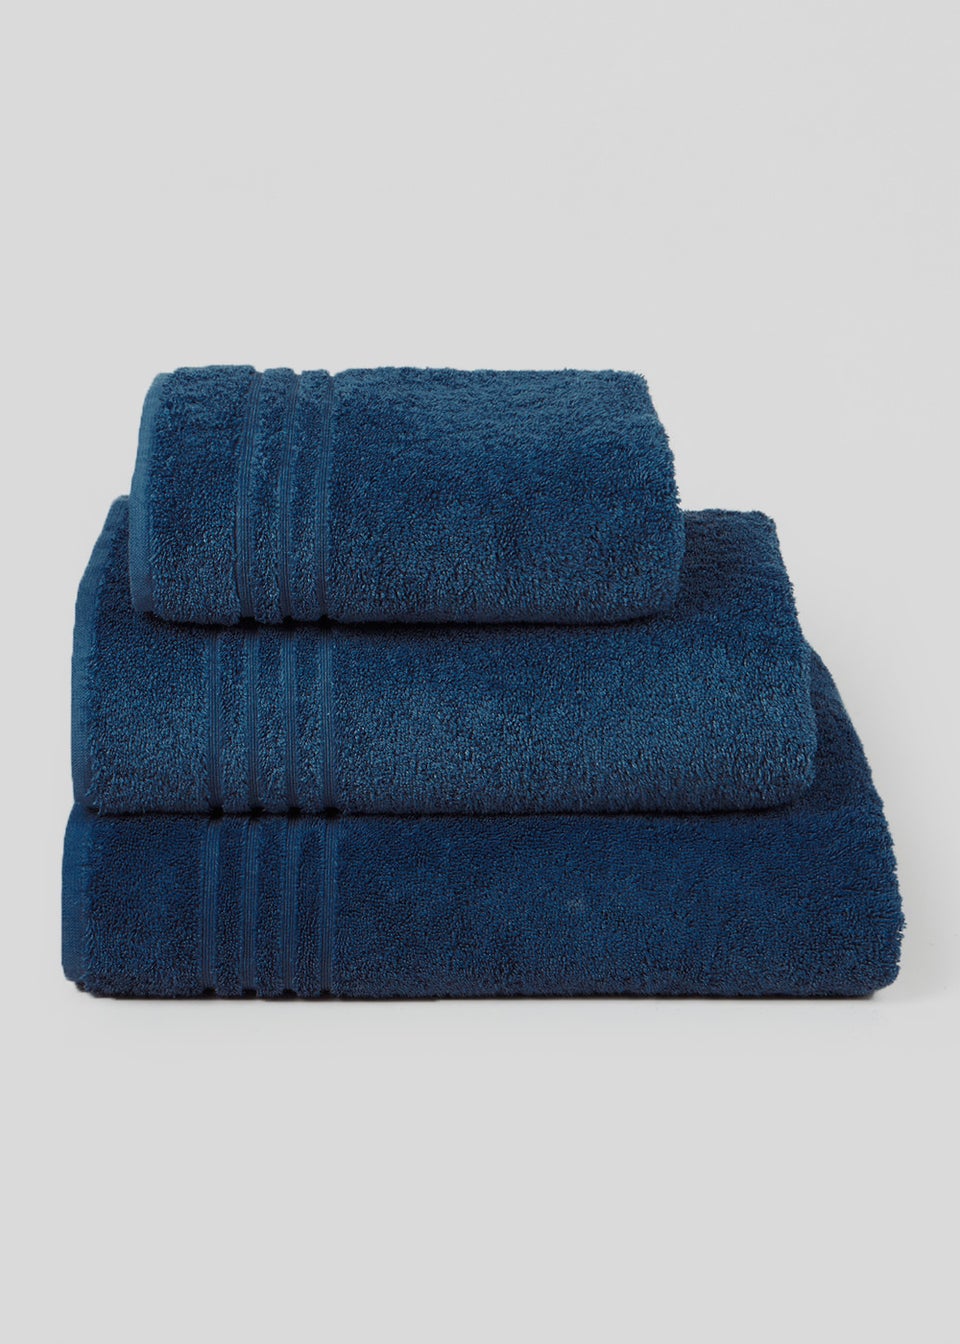 Egyptian Cotton Towels (680gsm)